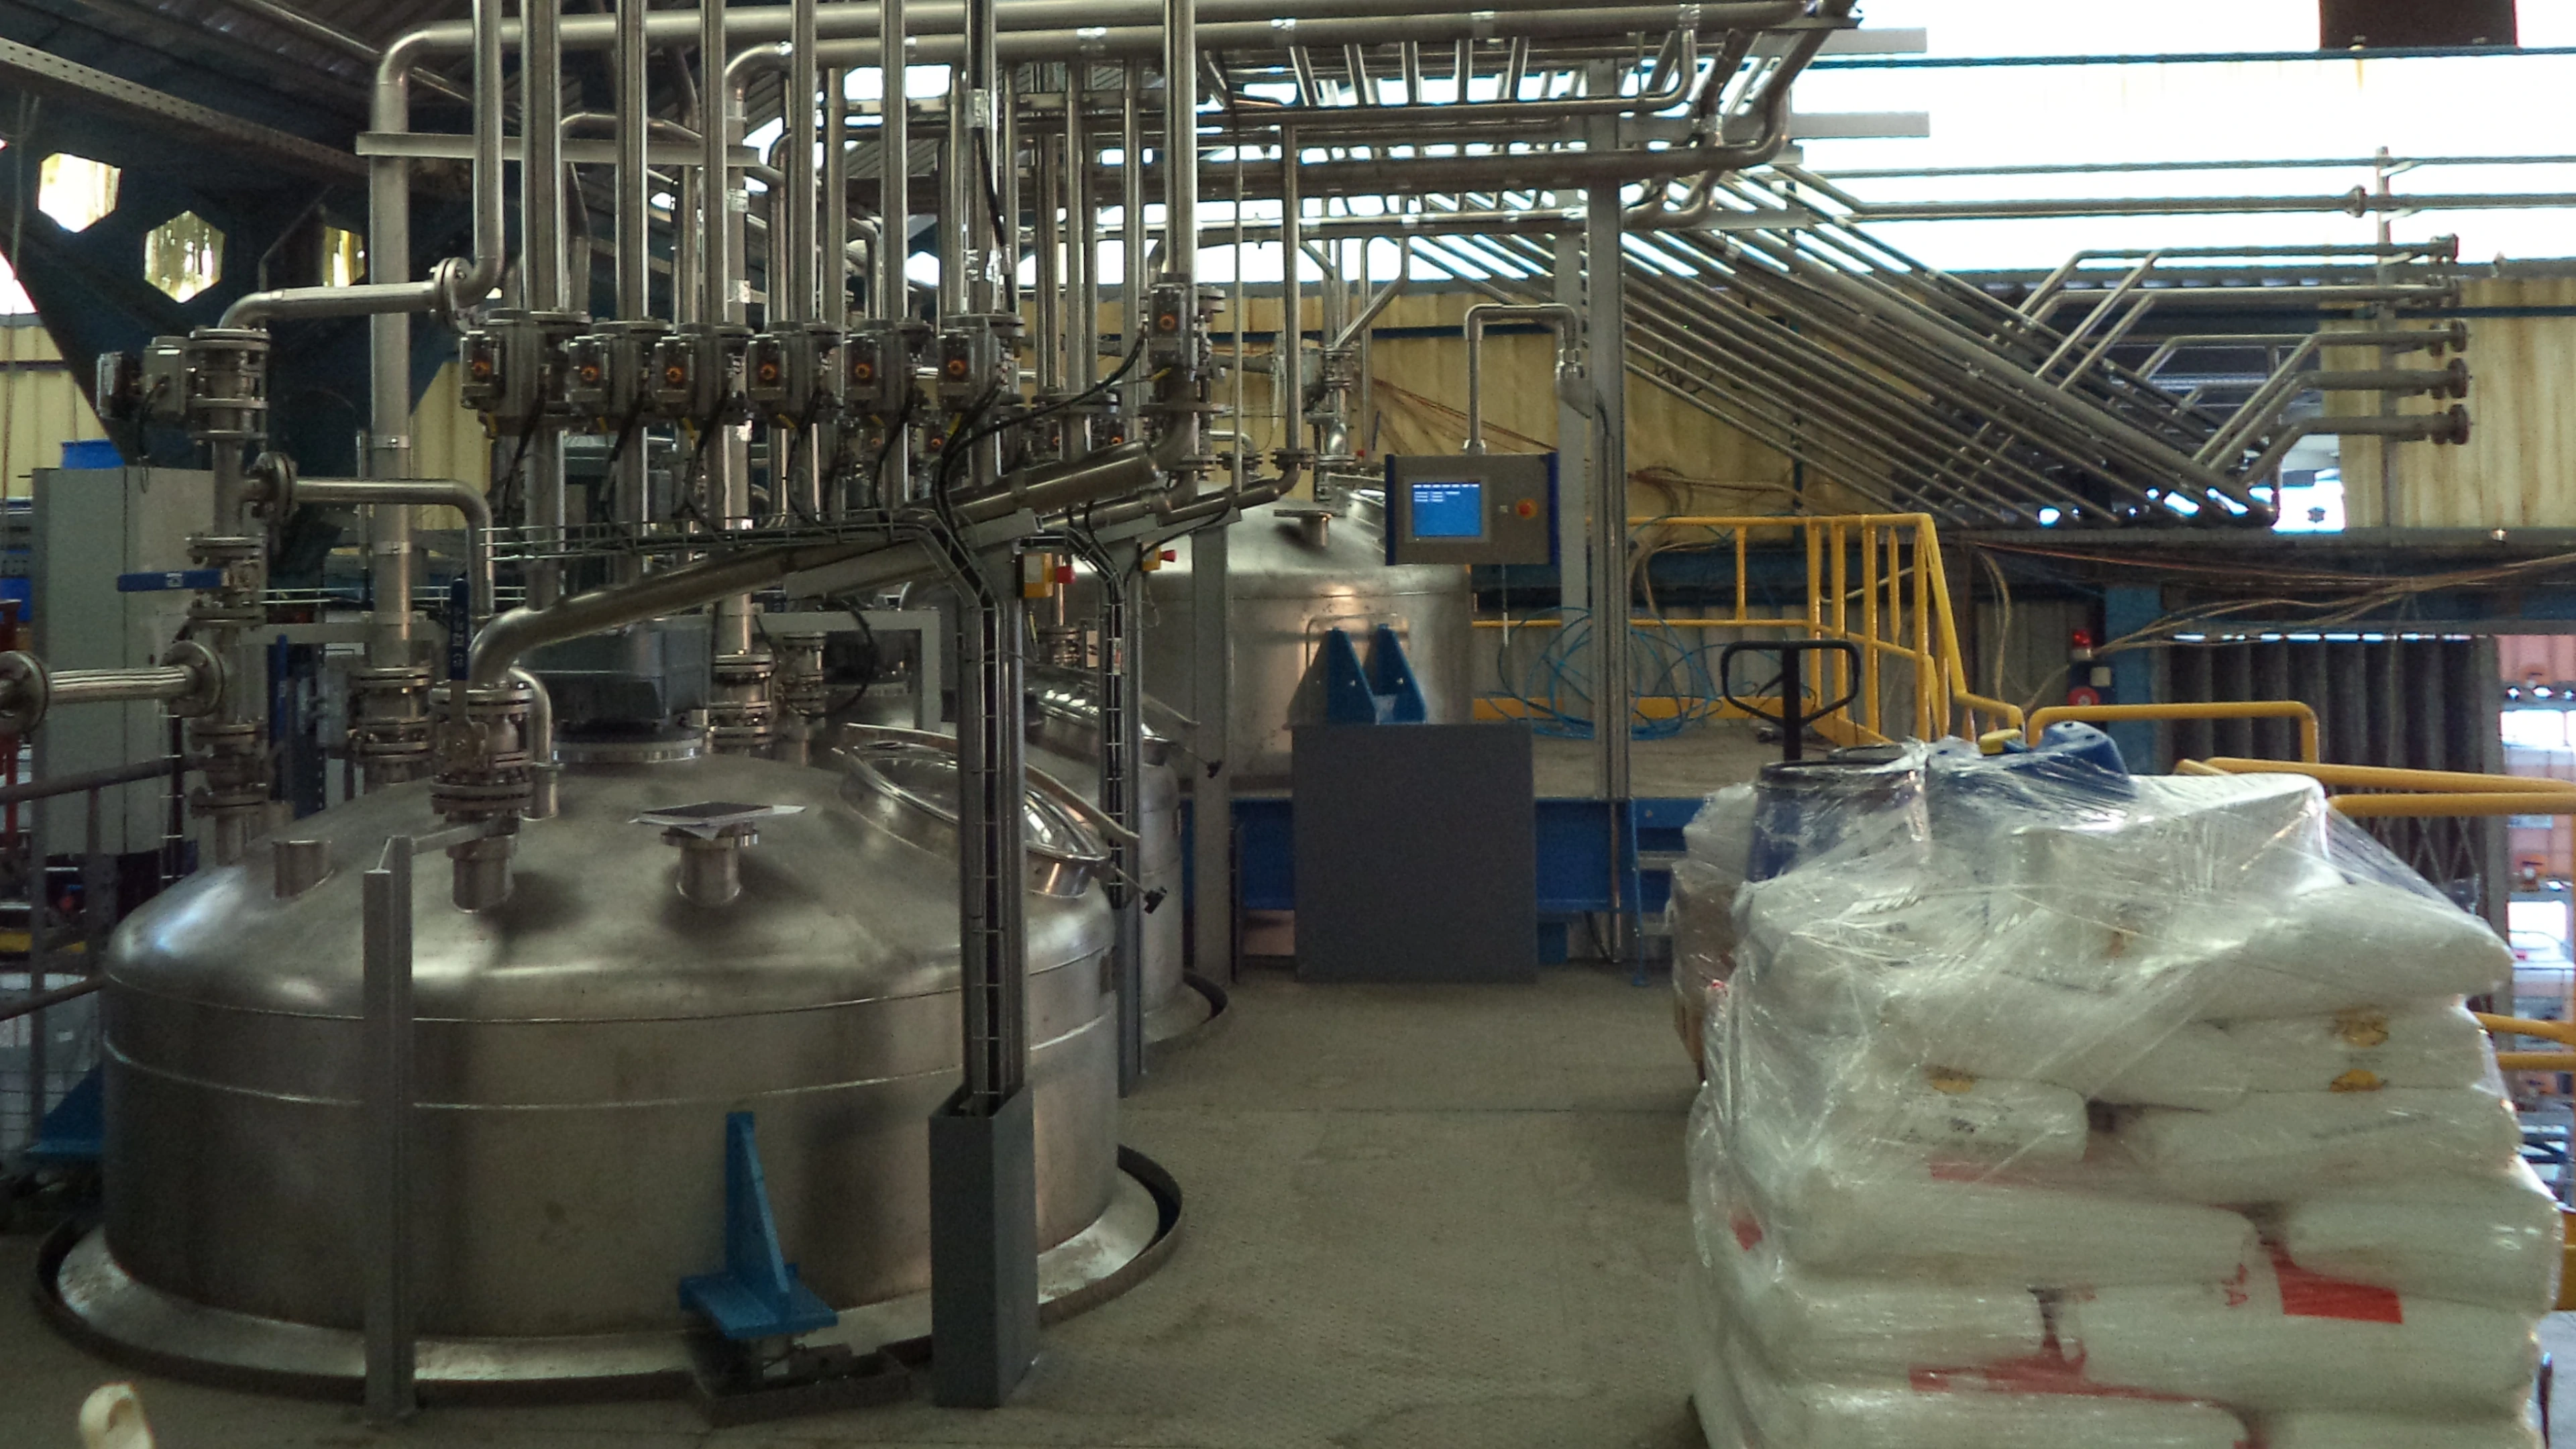 BTL Mixers in stainless stell - Chemical Industry - Detergents